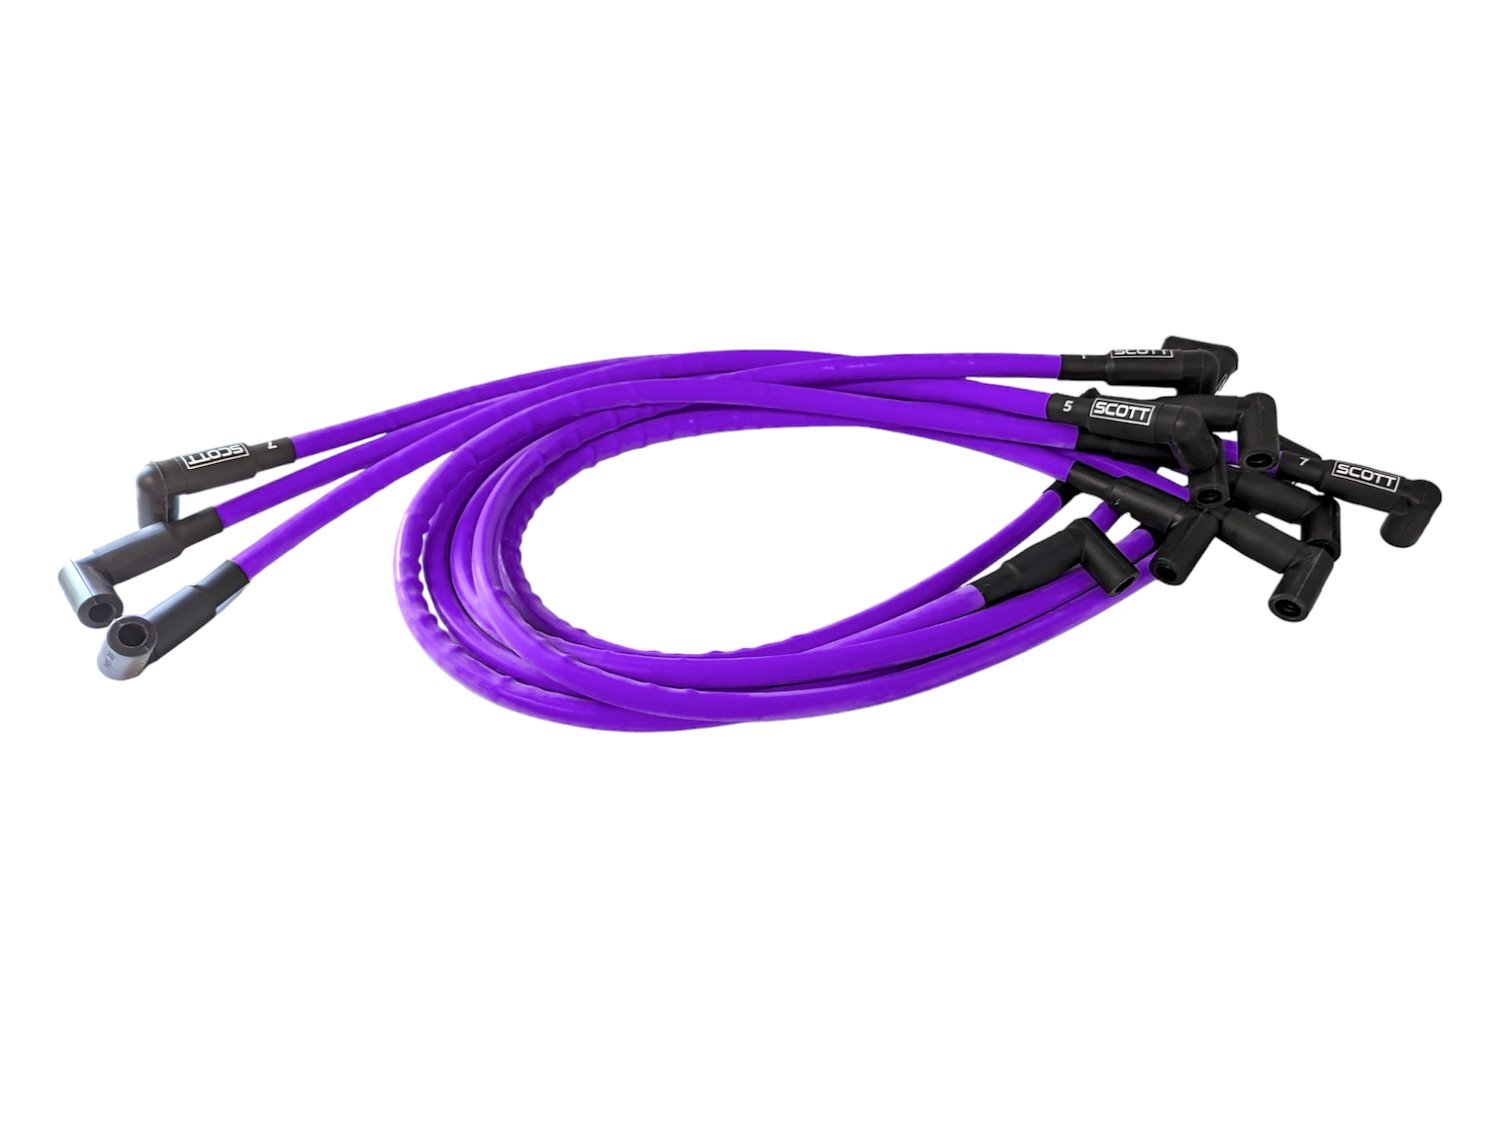 SPW-CH-437-6 High-Performance Silicone-Sleeved Spark Plug Wire Set for Small Block Chevy, Over & Under [Purple]